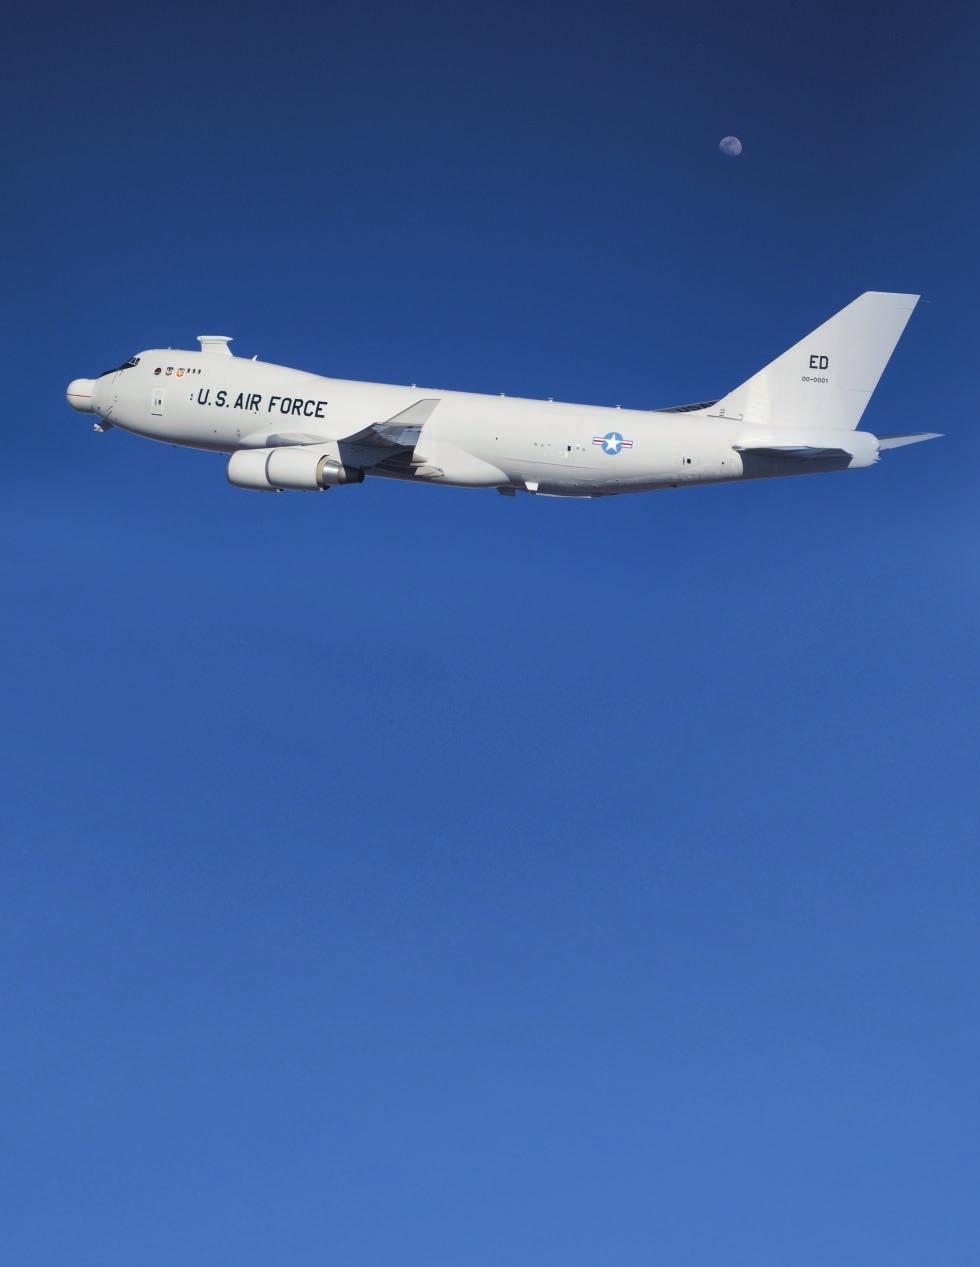 The Airborne Laser is the most revolutionary system in current missiledefense plans, combining speed-of-light interception with low-costs per kill and global mobility.